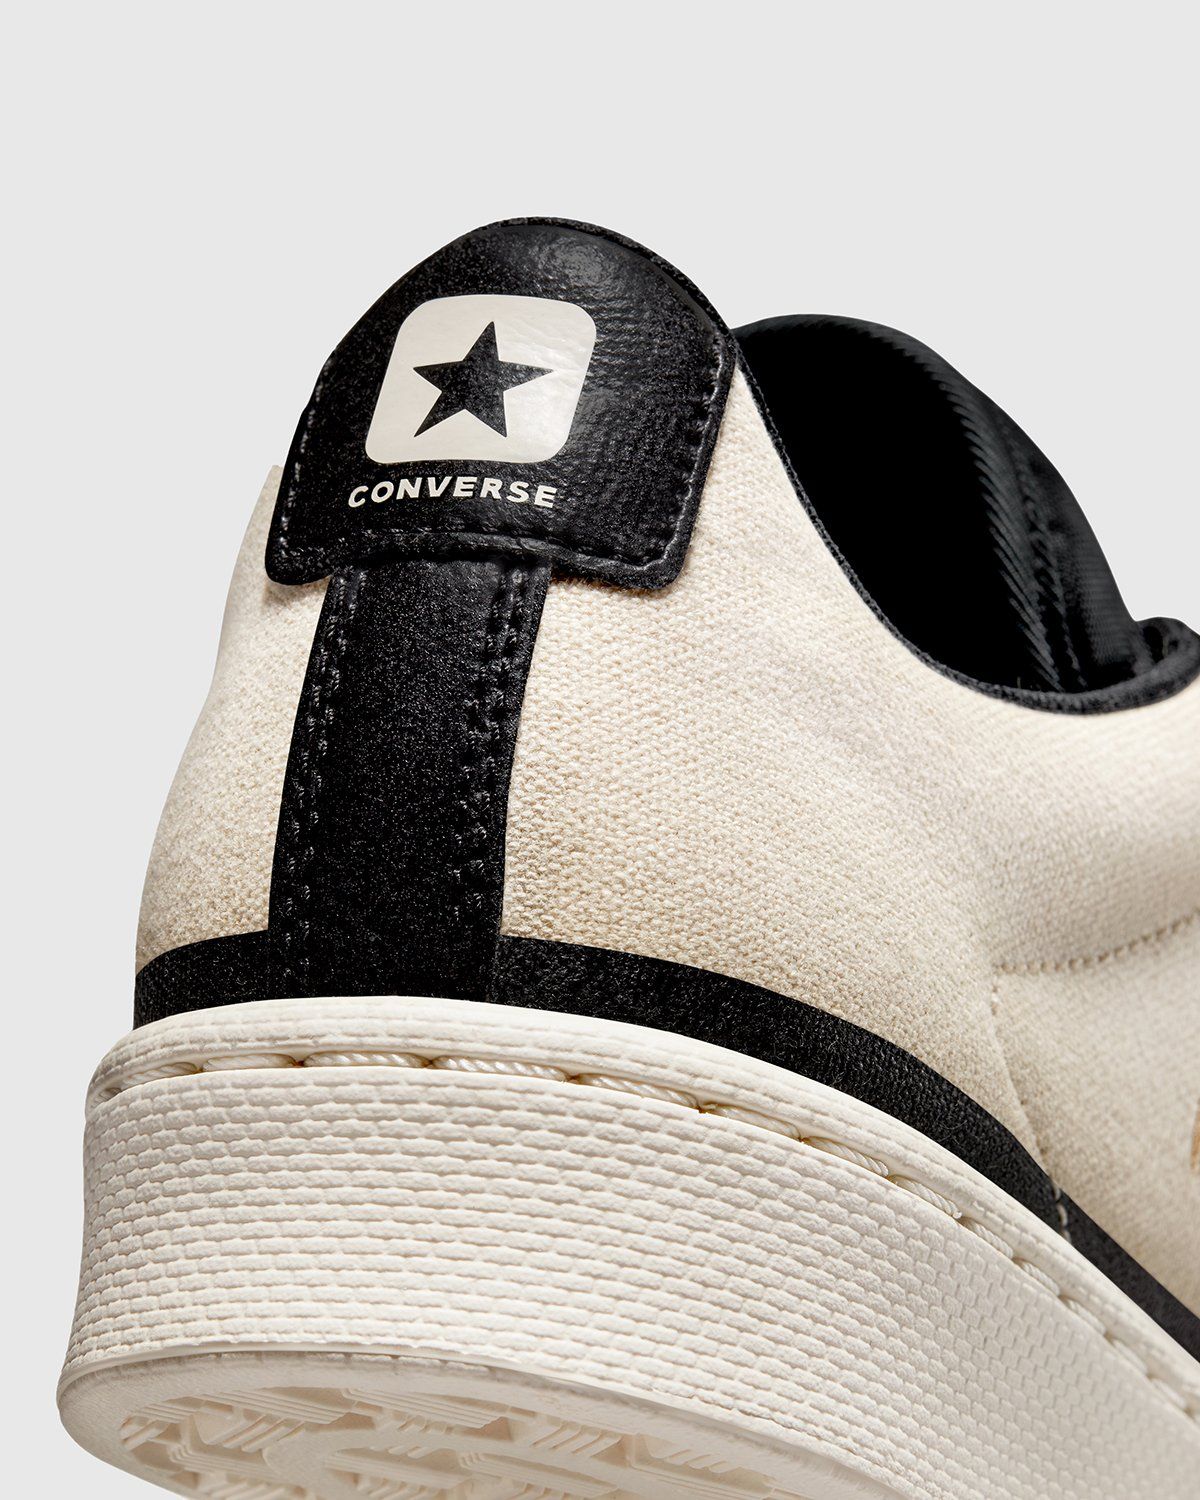 Converse x Joshua Vides – Pro Leather Ox Natural Ivory/Black/White - Low Top Sneakers - White - Image 6